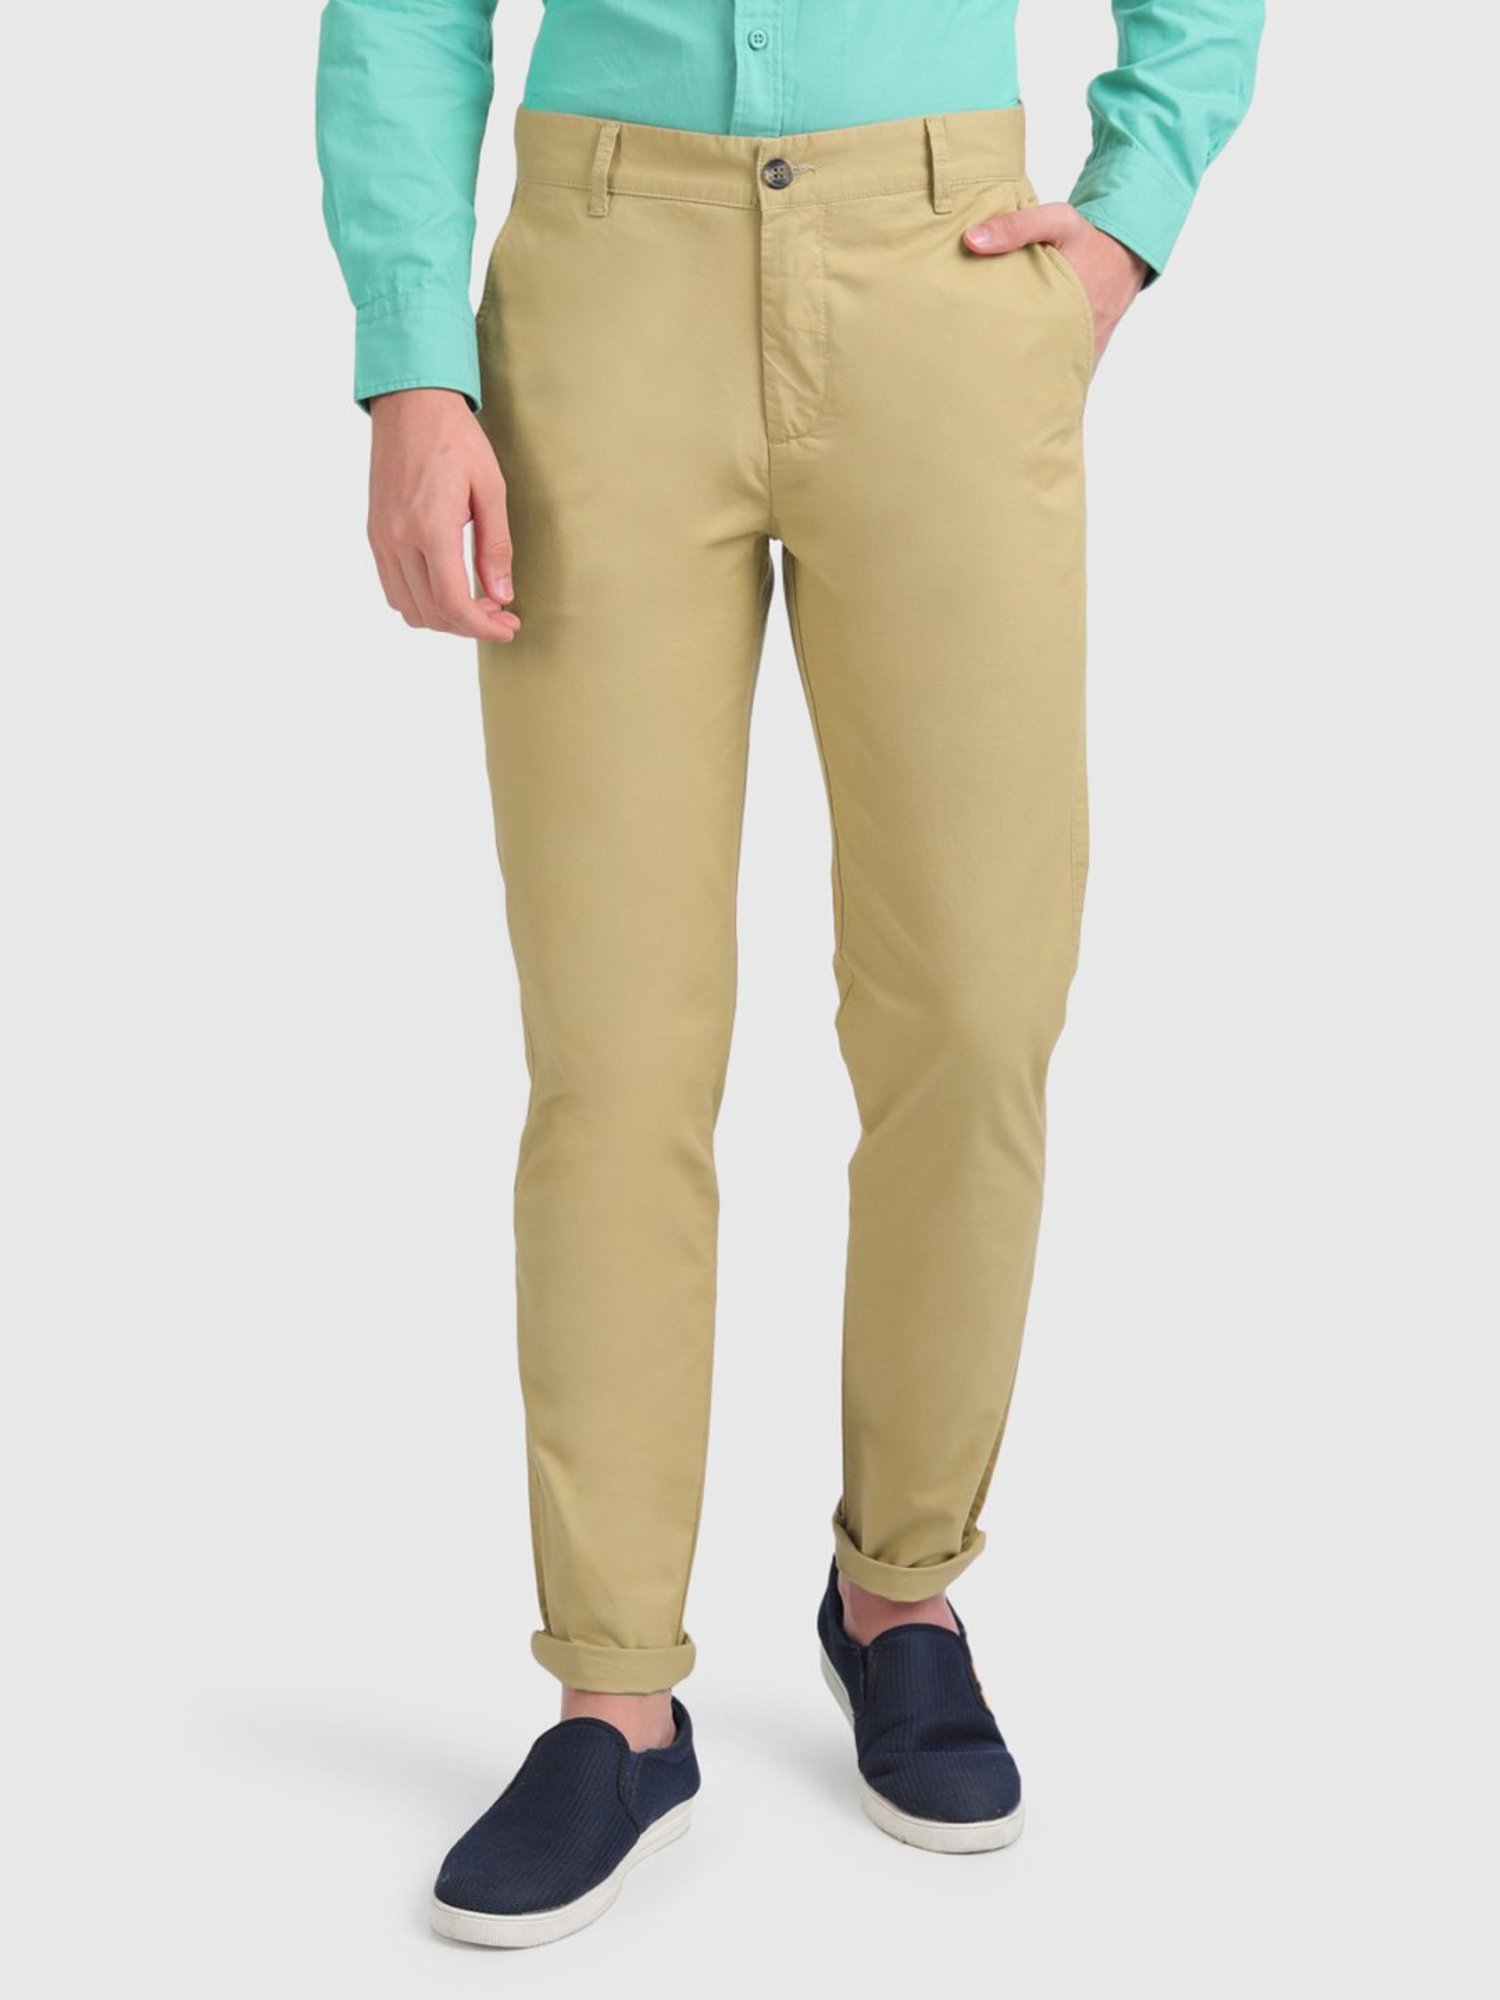 Buy Grey Trousers  Pants for Men by UNITED COLORS OF BENETTON Online   Ajiocom